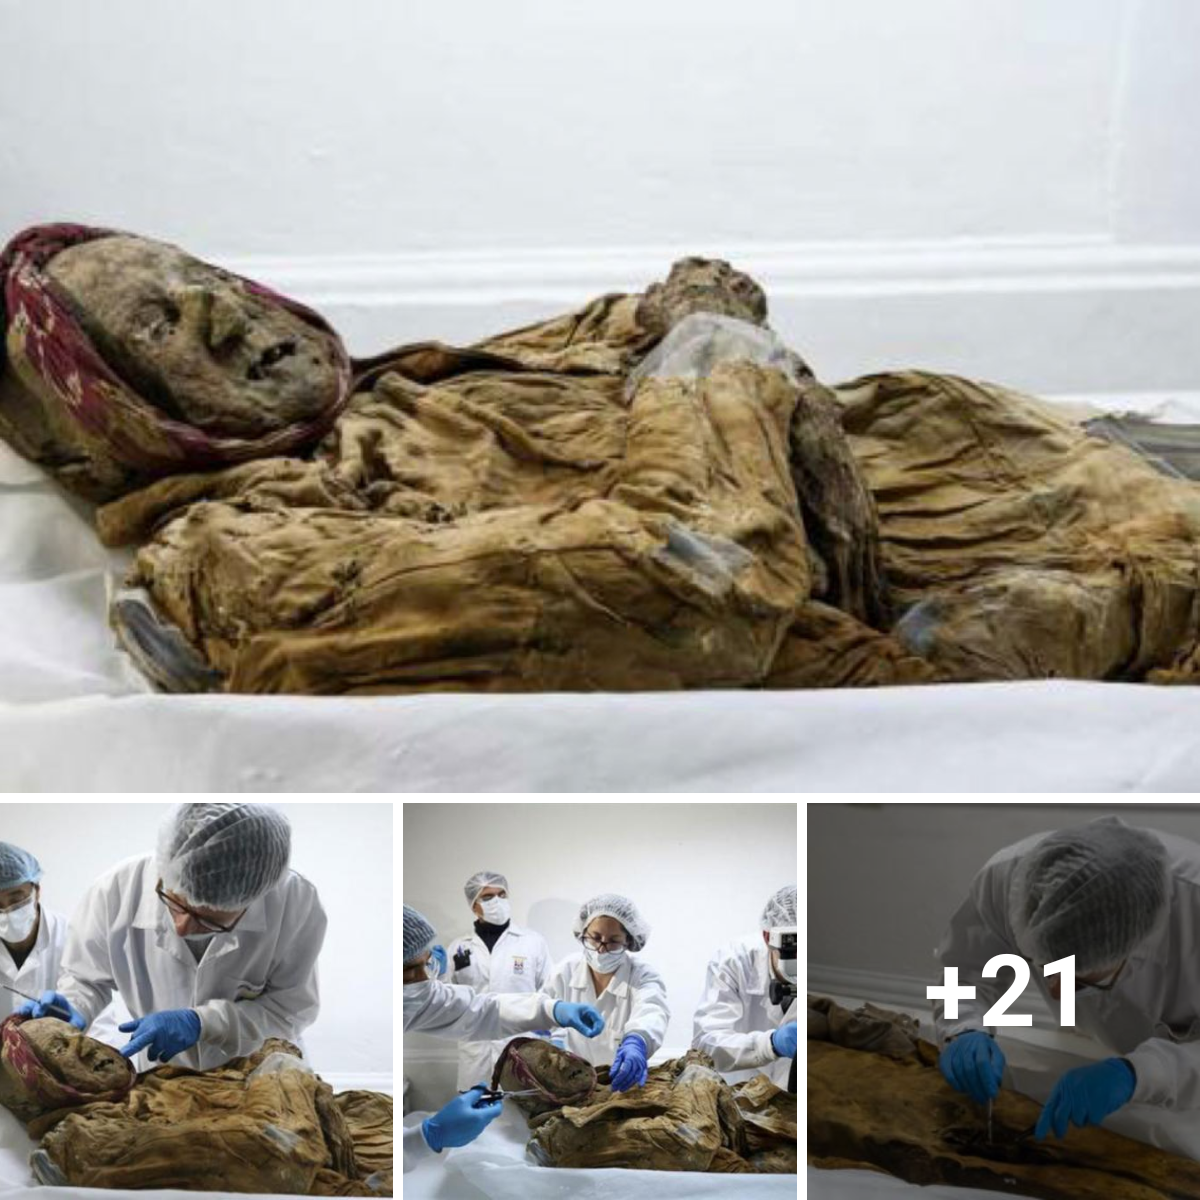 The Key to Understanding a Painful Global Illness Is Found in Ecuador’s Mummy of Guano